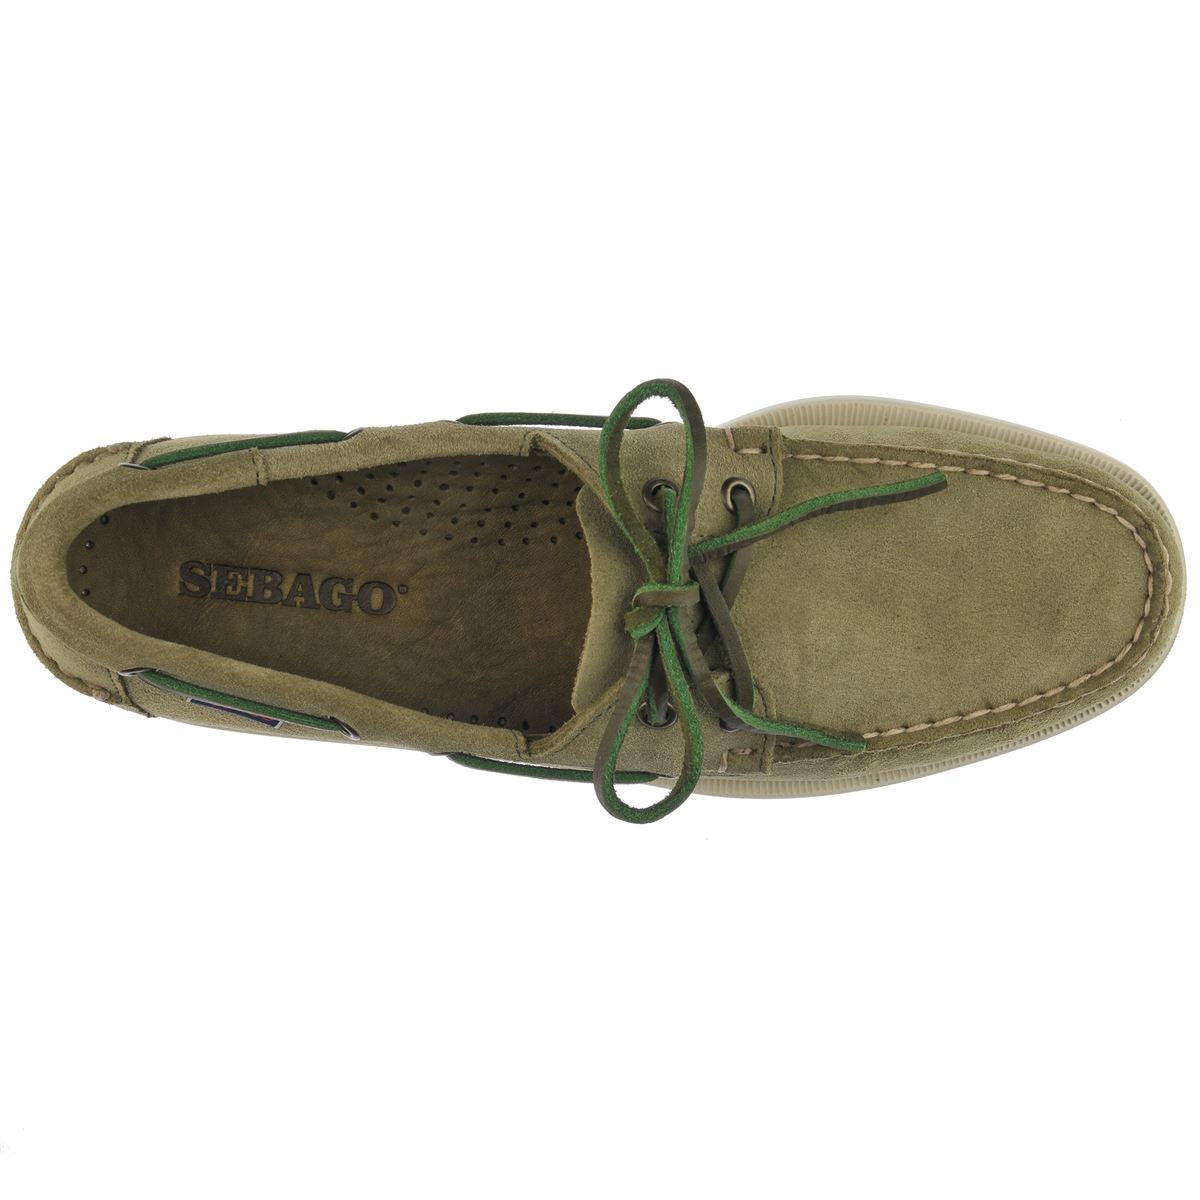 Portland Roughout - Forest Green